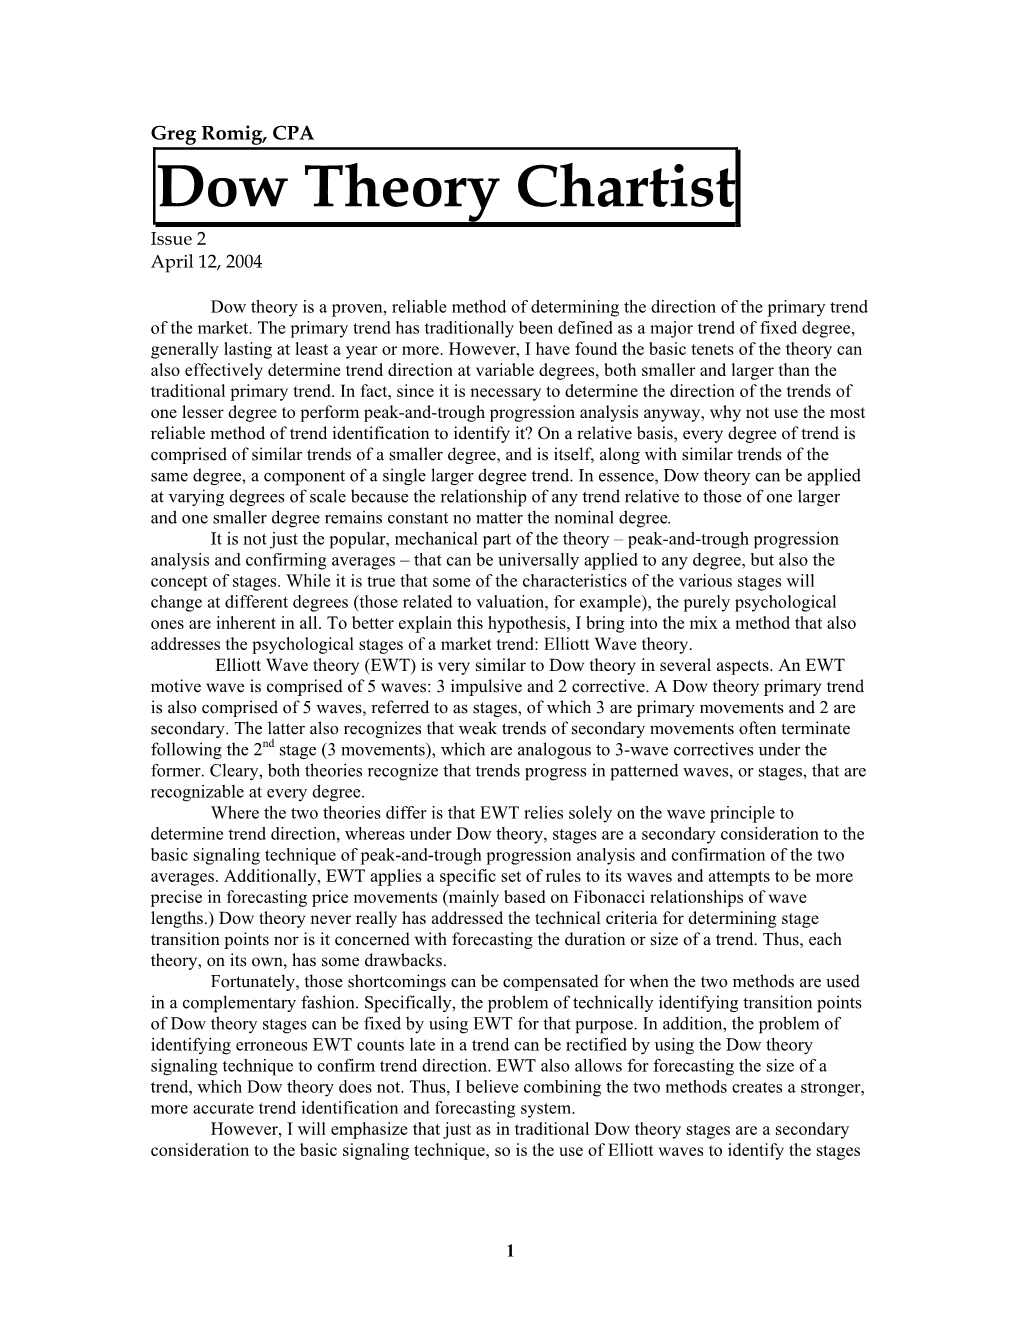 Dow Theory Chartist Issue 2 April 12, 2004